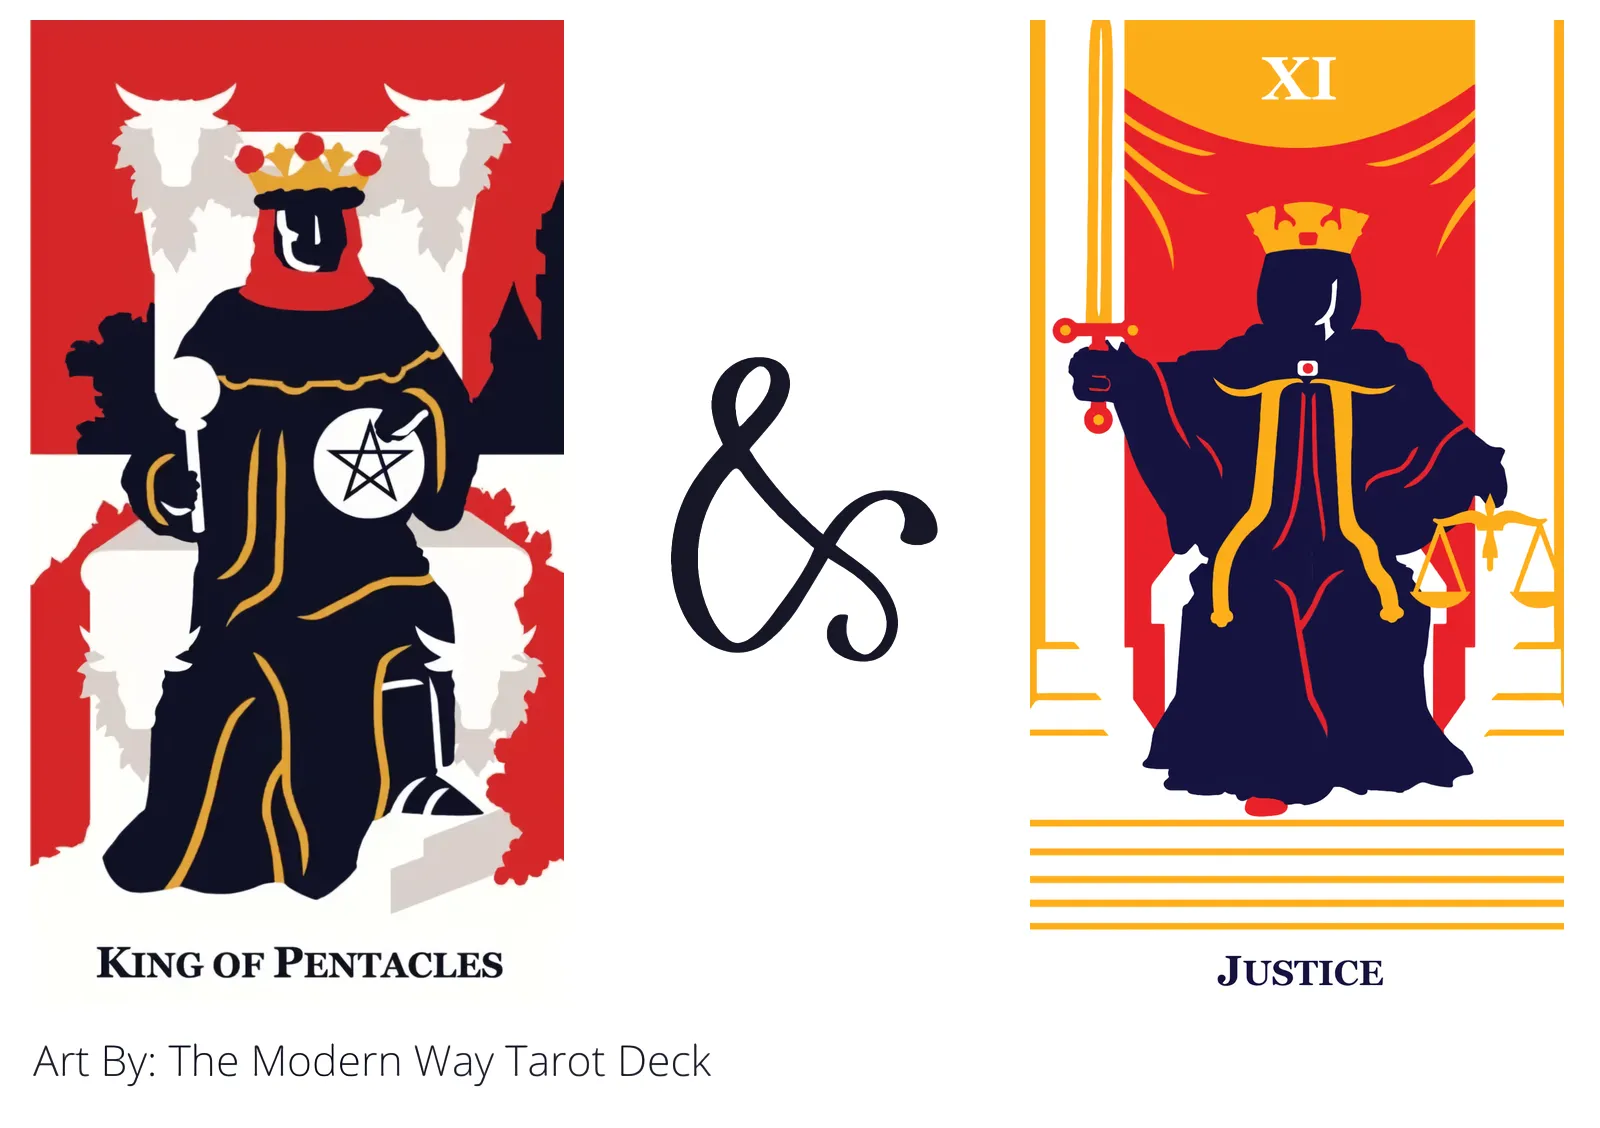 king of pentacles and justice tarot cards together